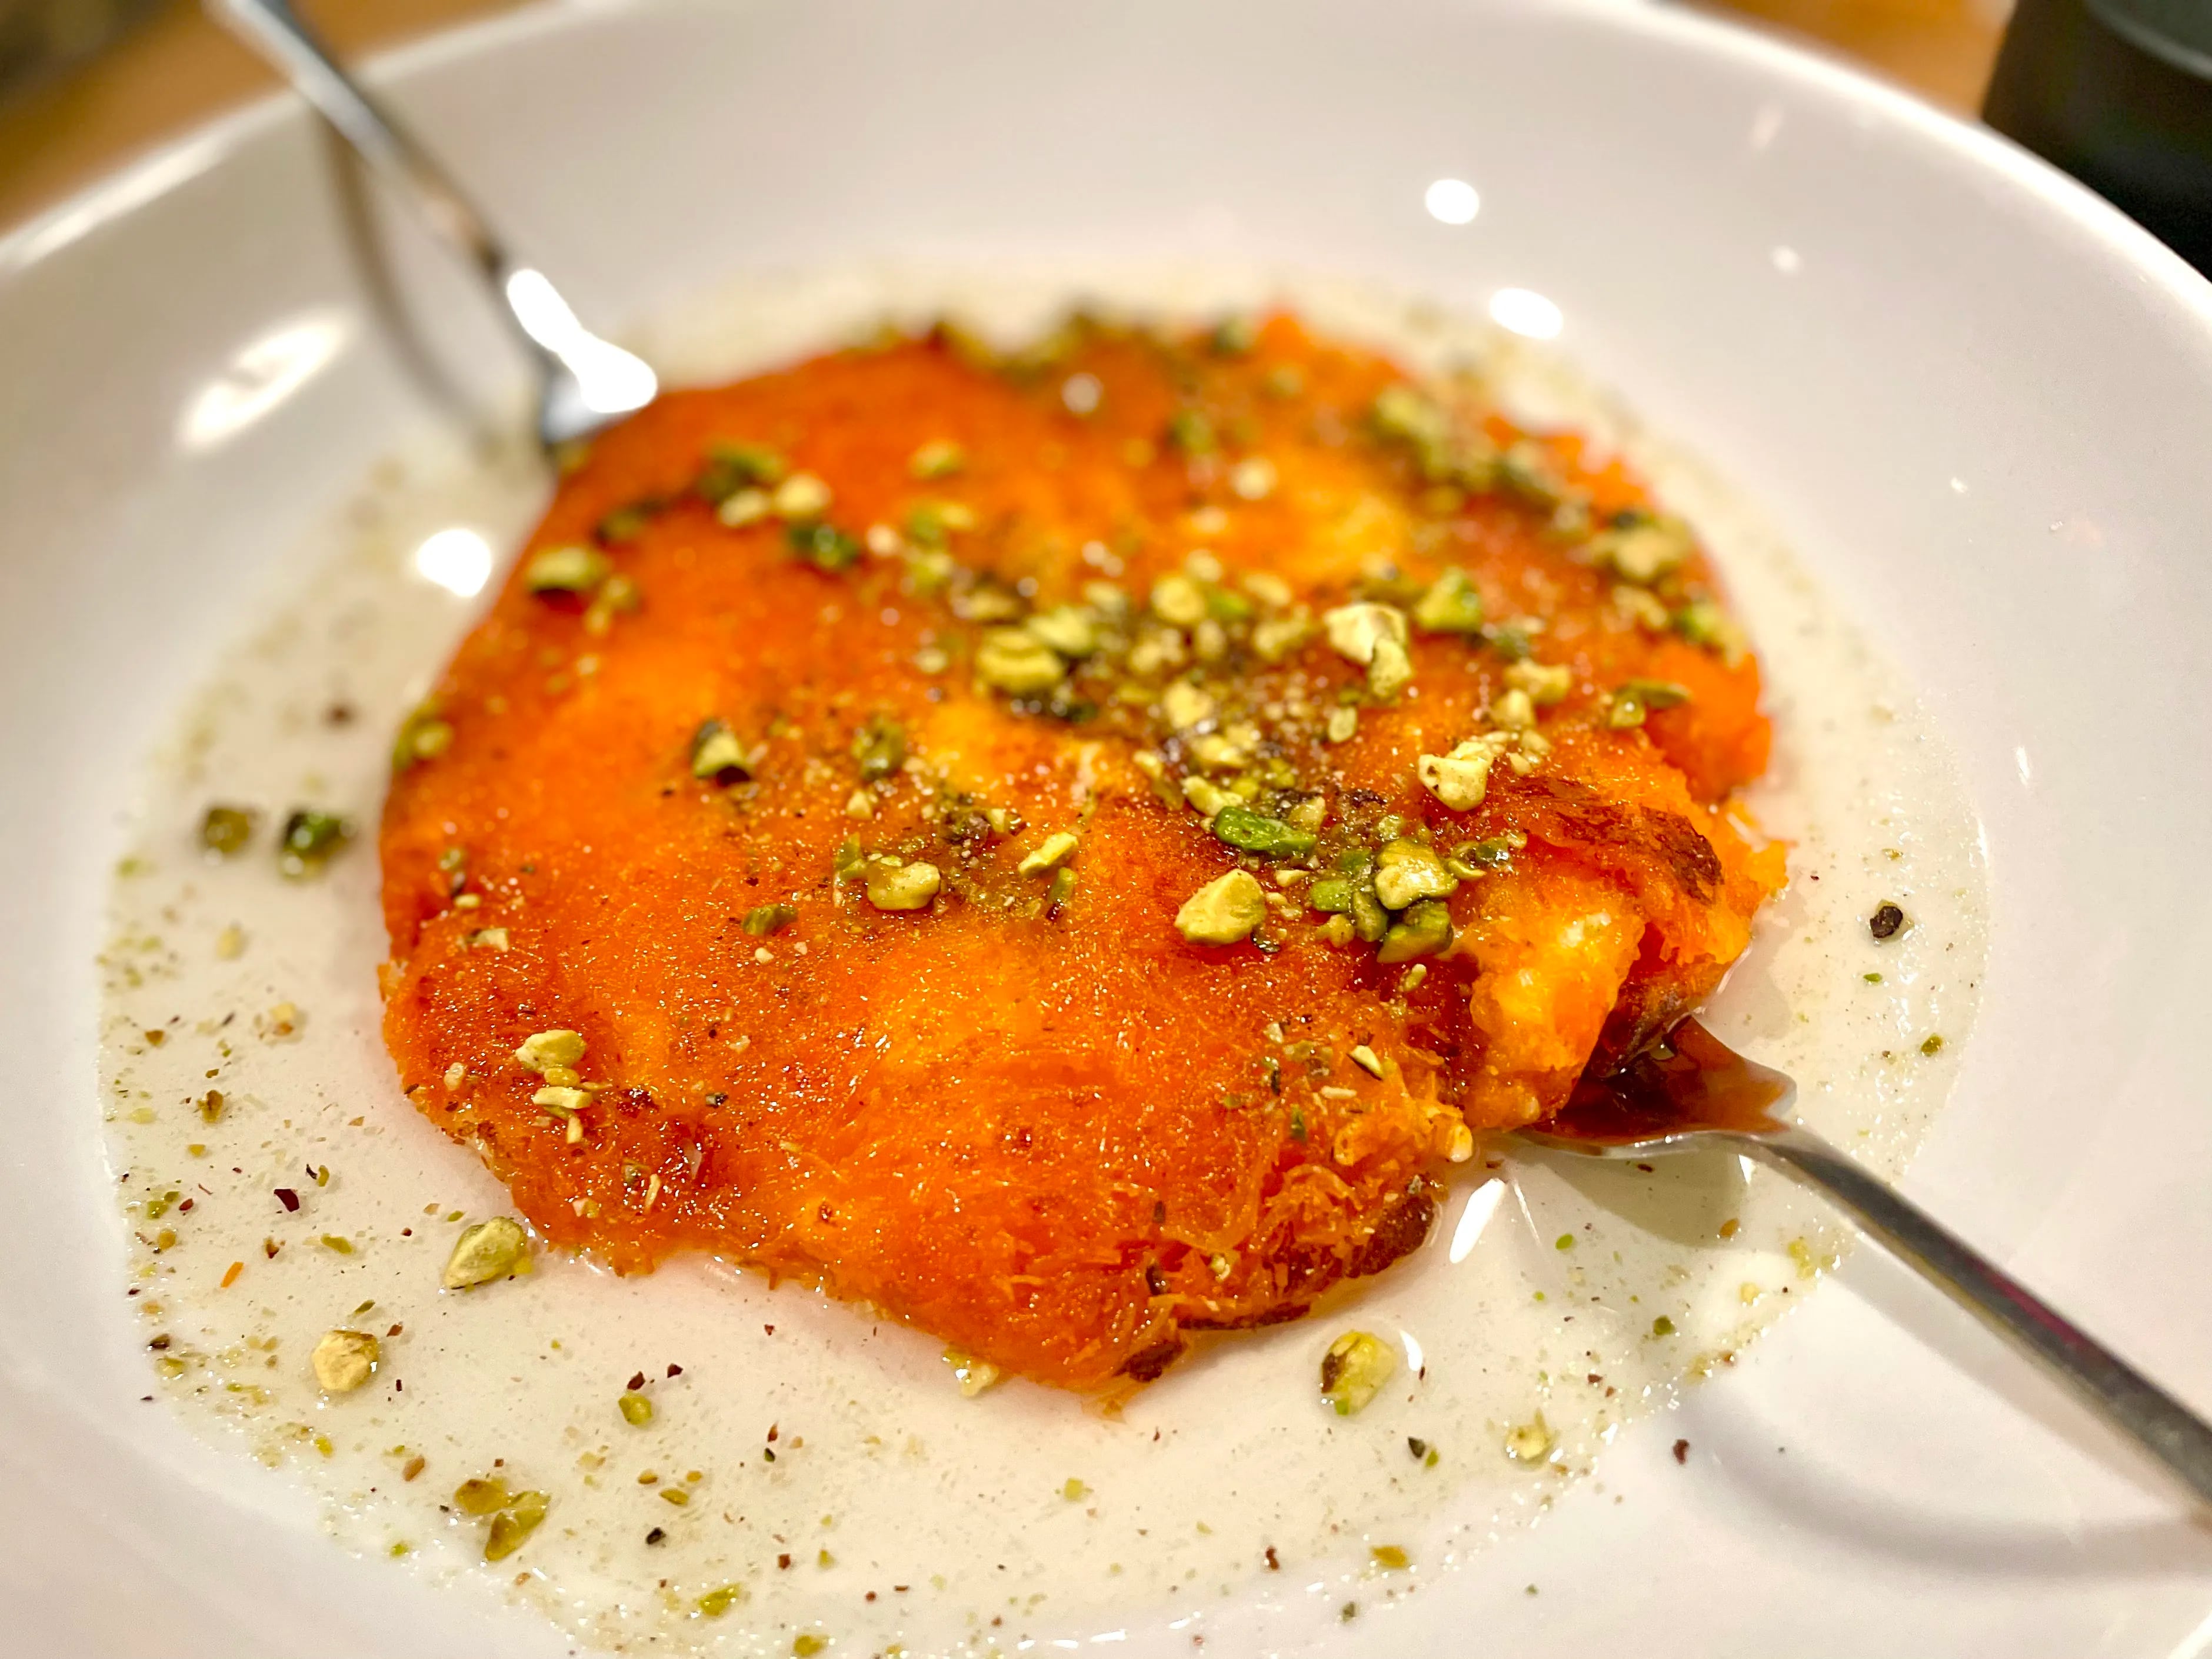 The knafeh Nablusi for two, sandwich oozy cheese between crispy kataifi doused in rosewater syrup, is one of the dessert highlights at Renata's in University City.